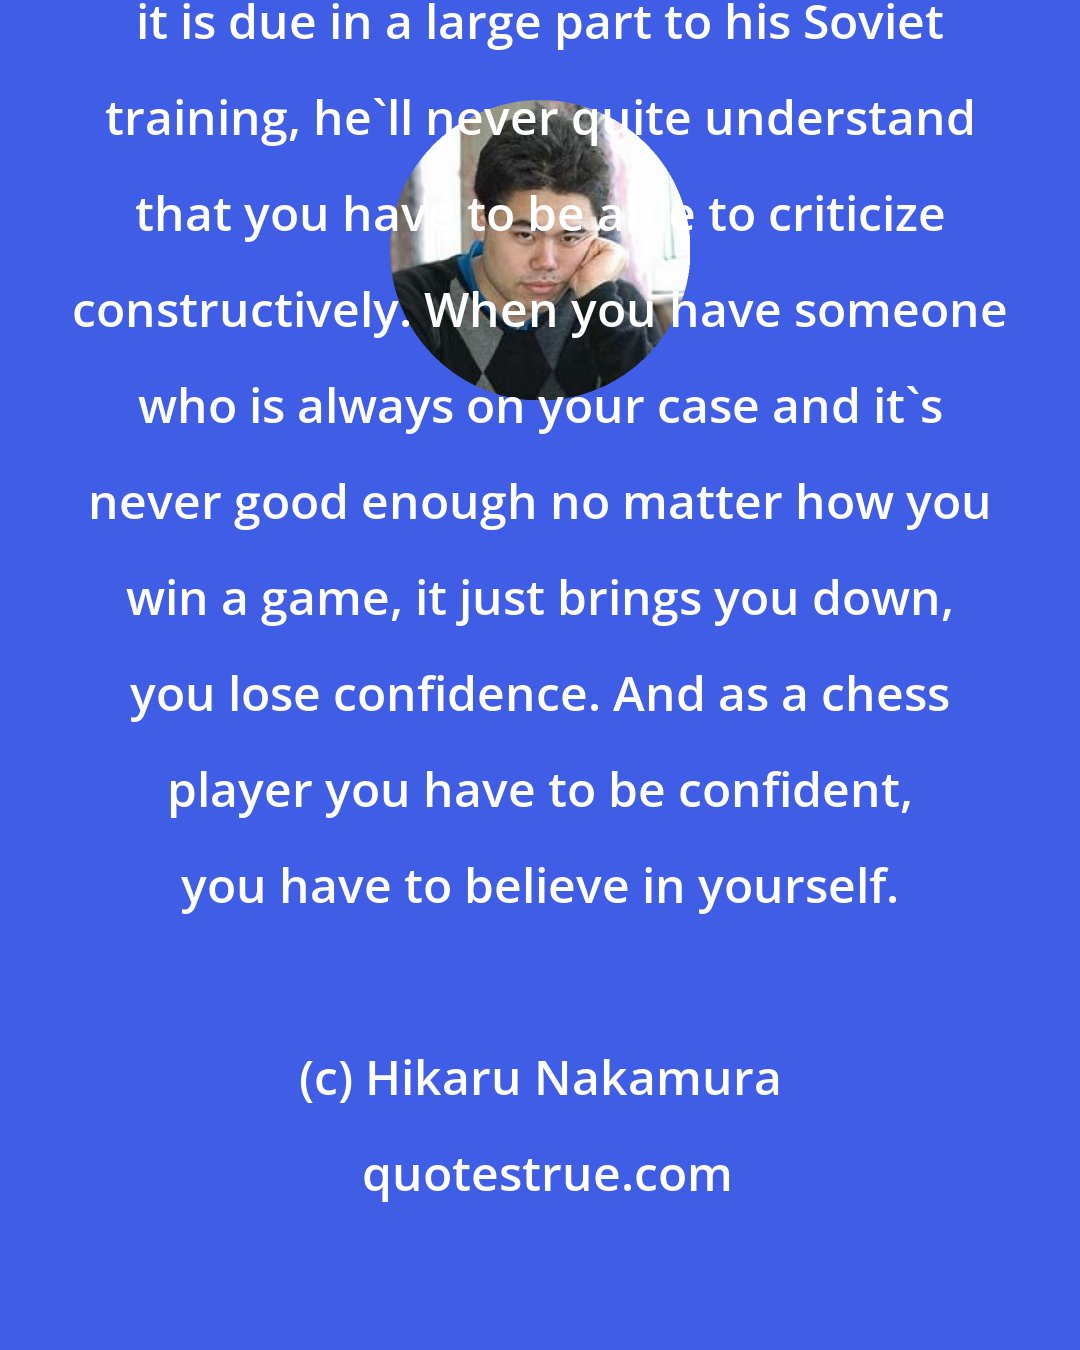 Hikaru Nakamura: One thing with Garry, and I think it is due in a large part to his Soviet training, he'll never quite understand that you have to be able to criticize constructively. When you have someone who is always on your case and it's never good enough no matter how you win a game, it just brings you down, you lose confidence. And as a chess player you have to be confident, you have to believe in yourself.